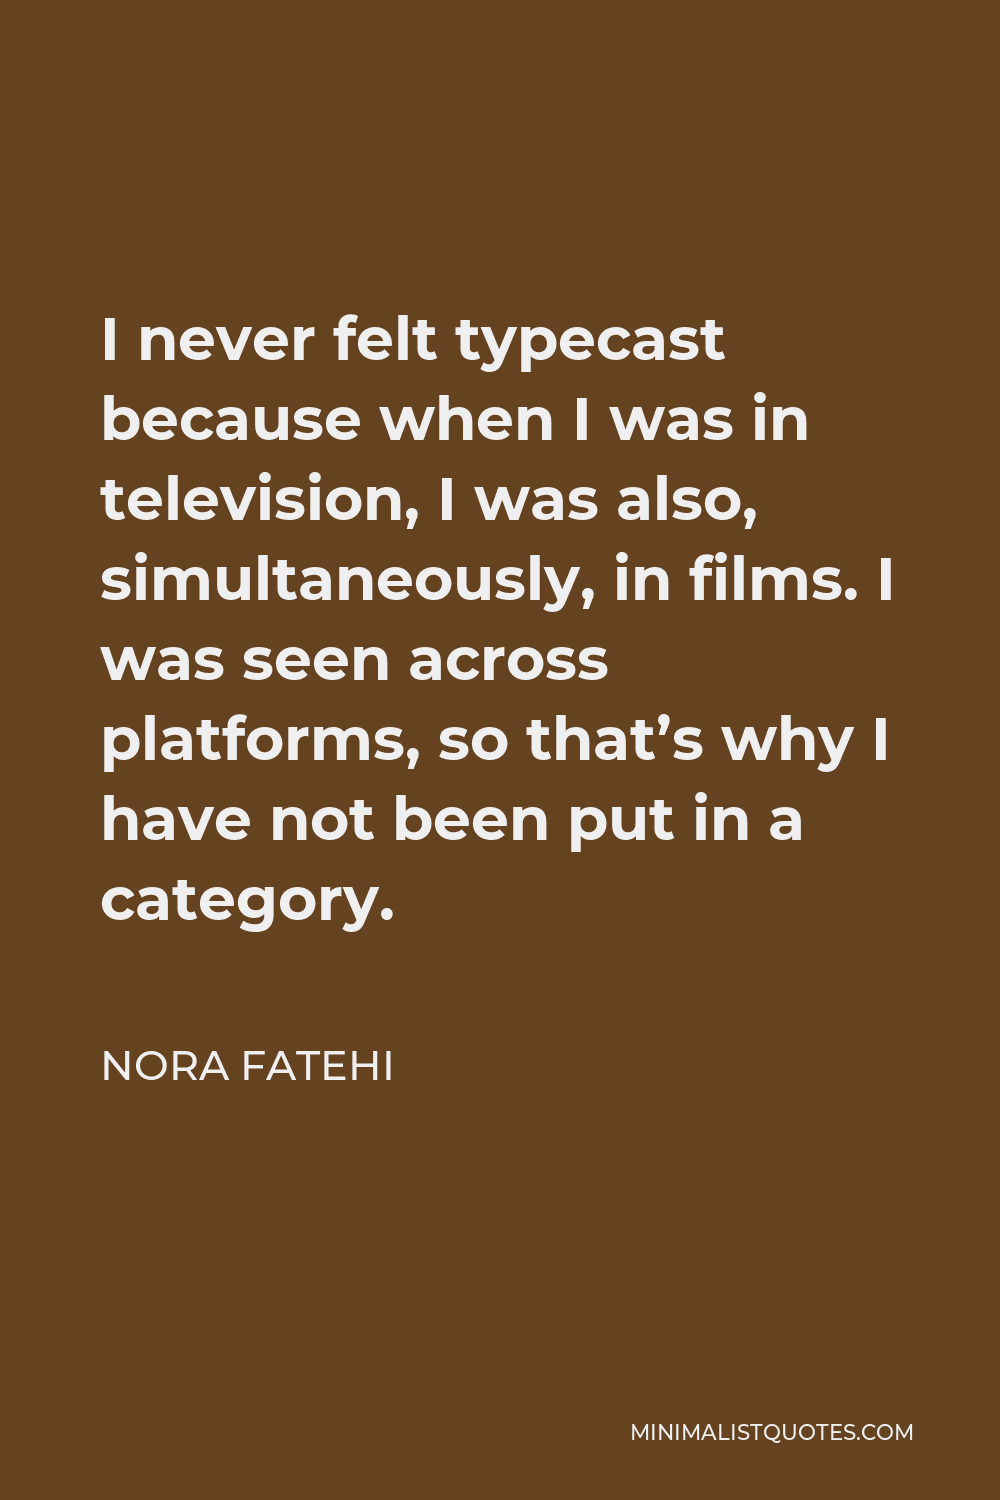 Nora Fatehi Quote - I never felt typecast because when I was in television, I was also, simultaneously, in films. I was seen across platforms, so that’s why I have not been put in a category.